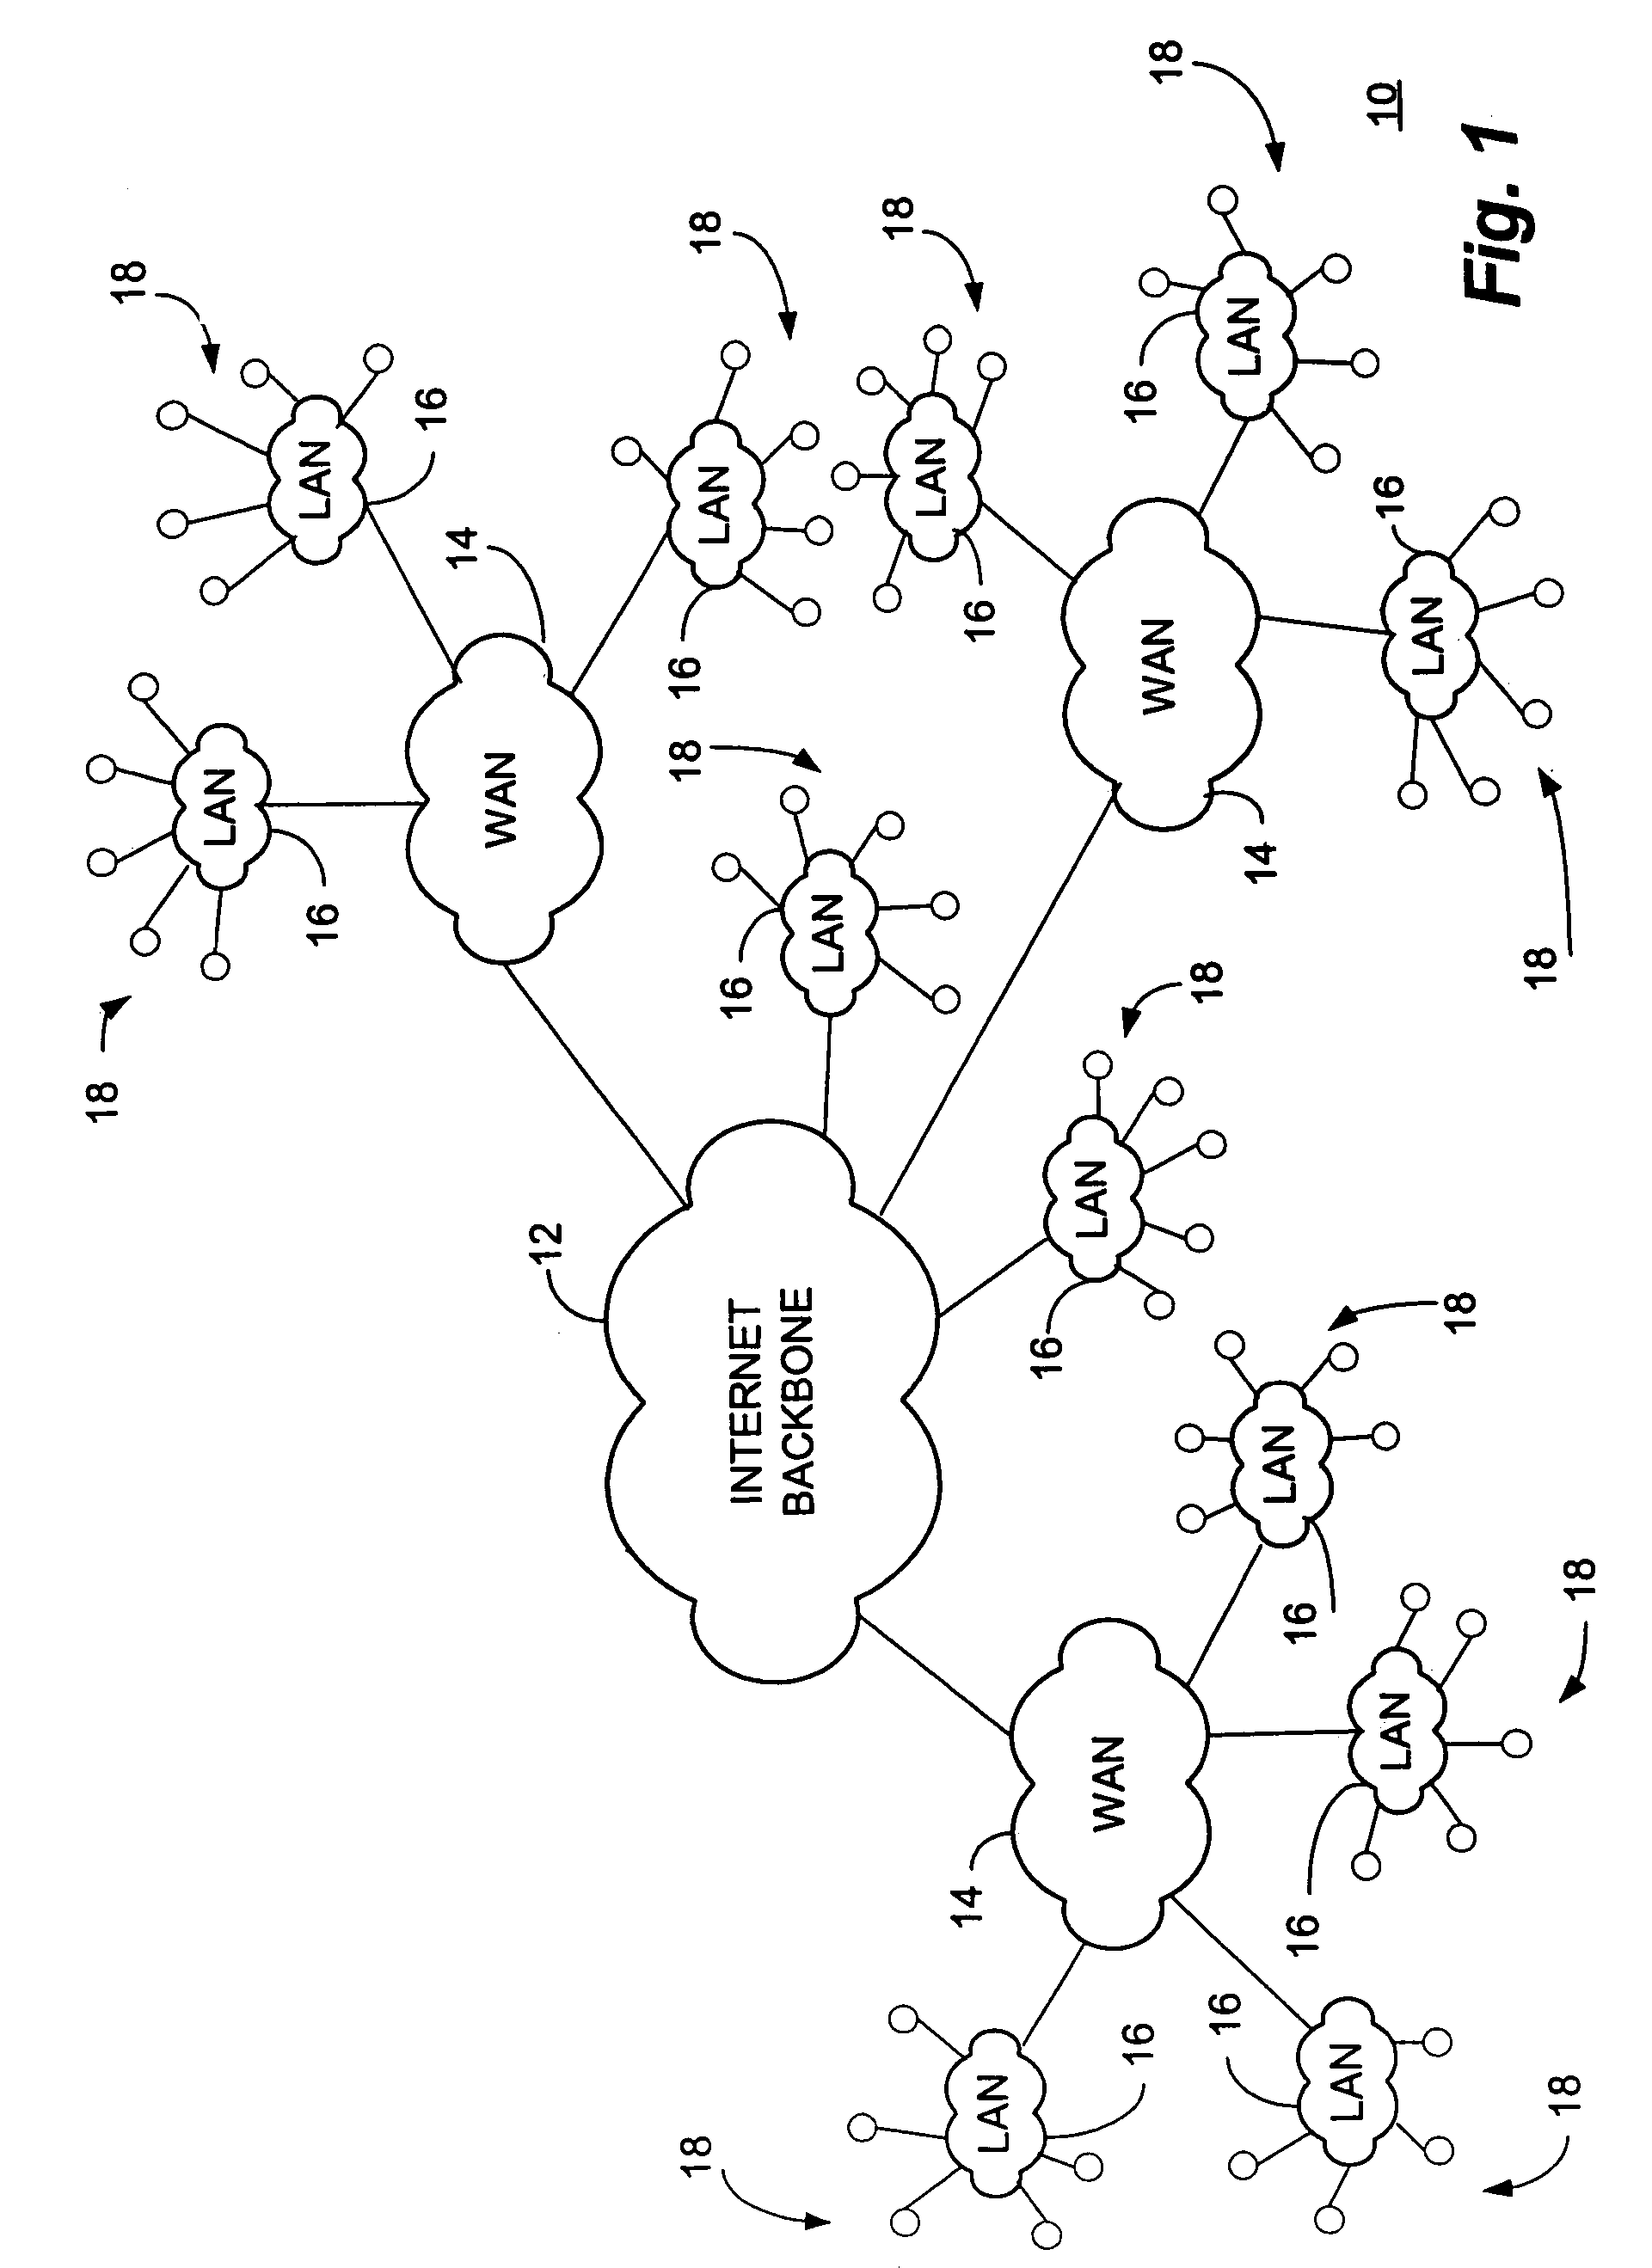 System and method for unorchestrated determination of data sequences using sticky byte factoring to determine breakpoints in digital sequences